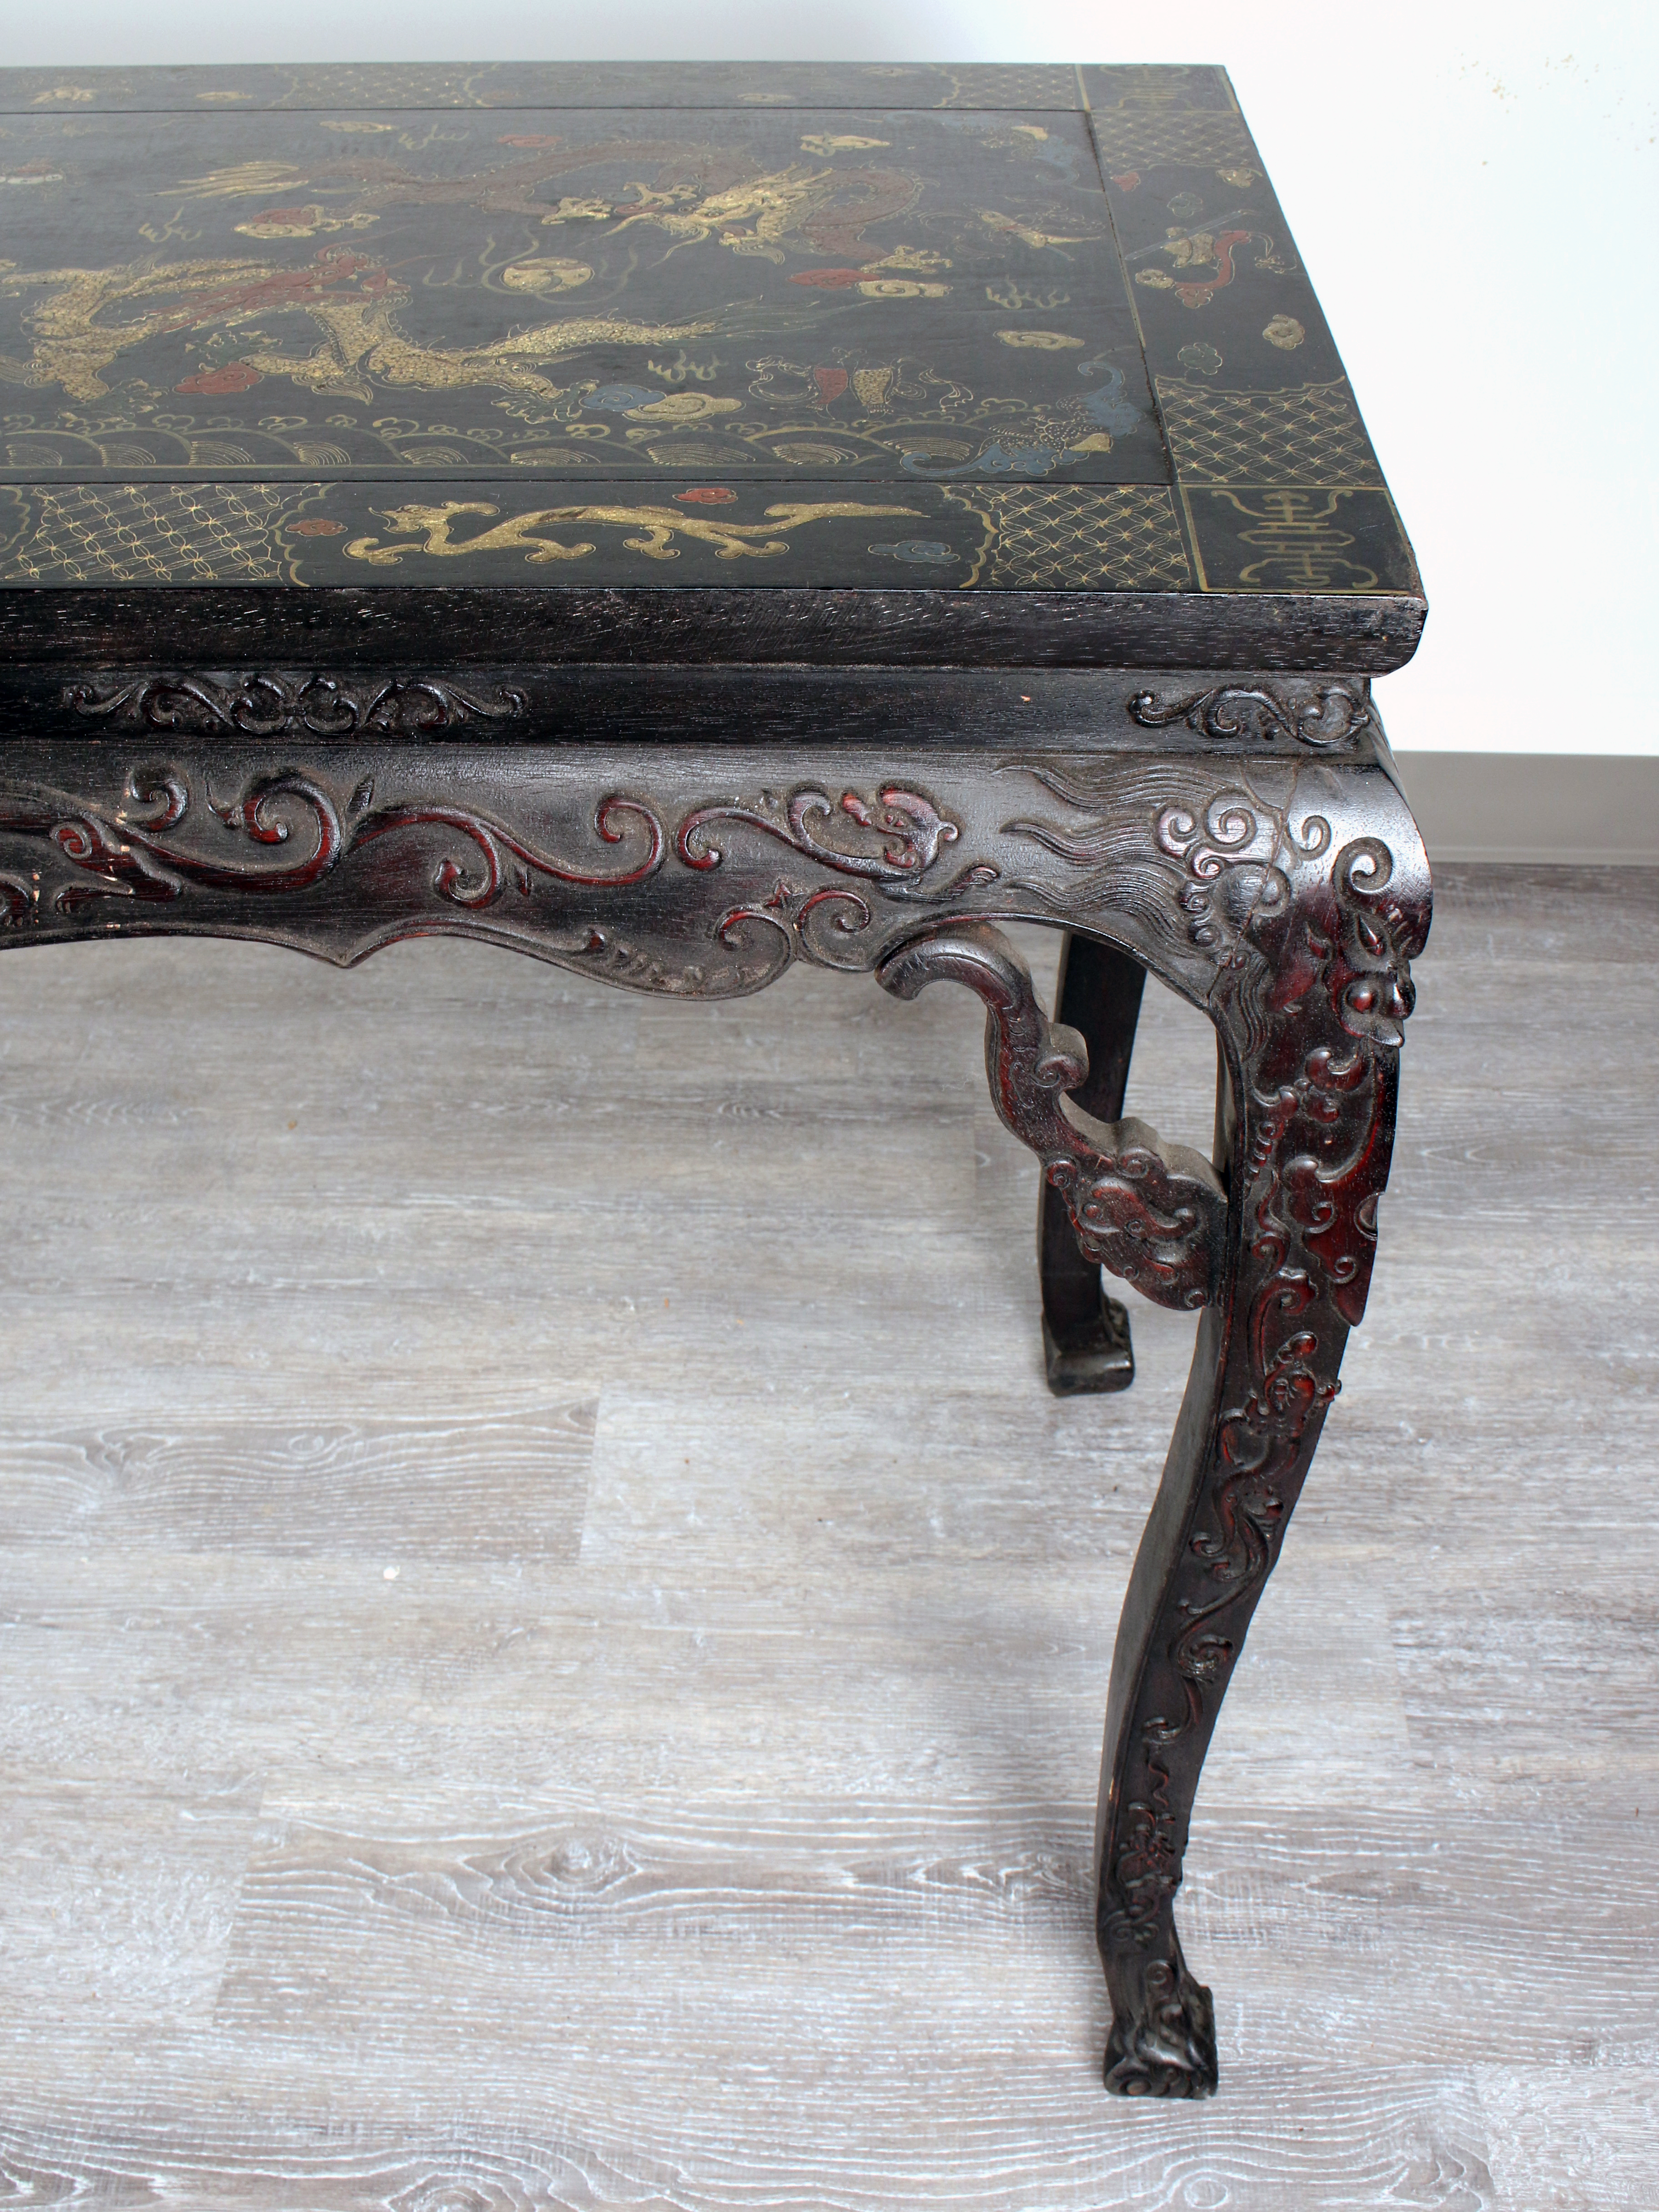 Vibrant Chinese Lacquer Table With Dragon Painting & Scholar Motifs image 8